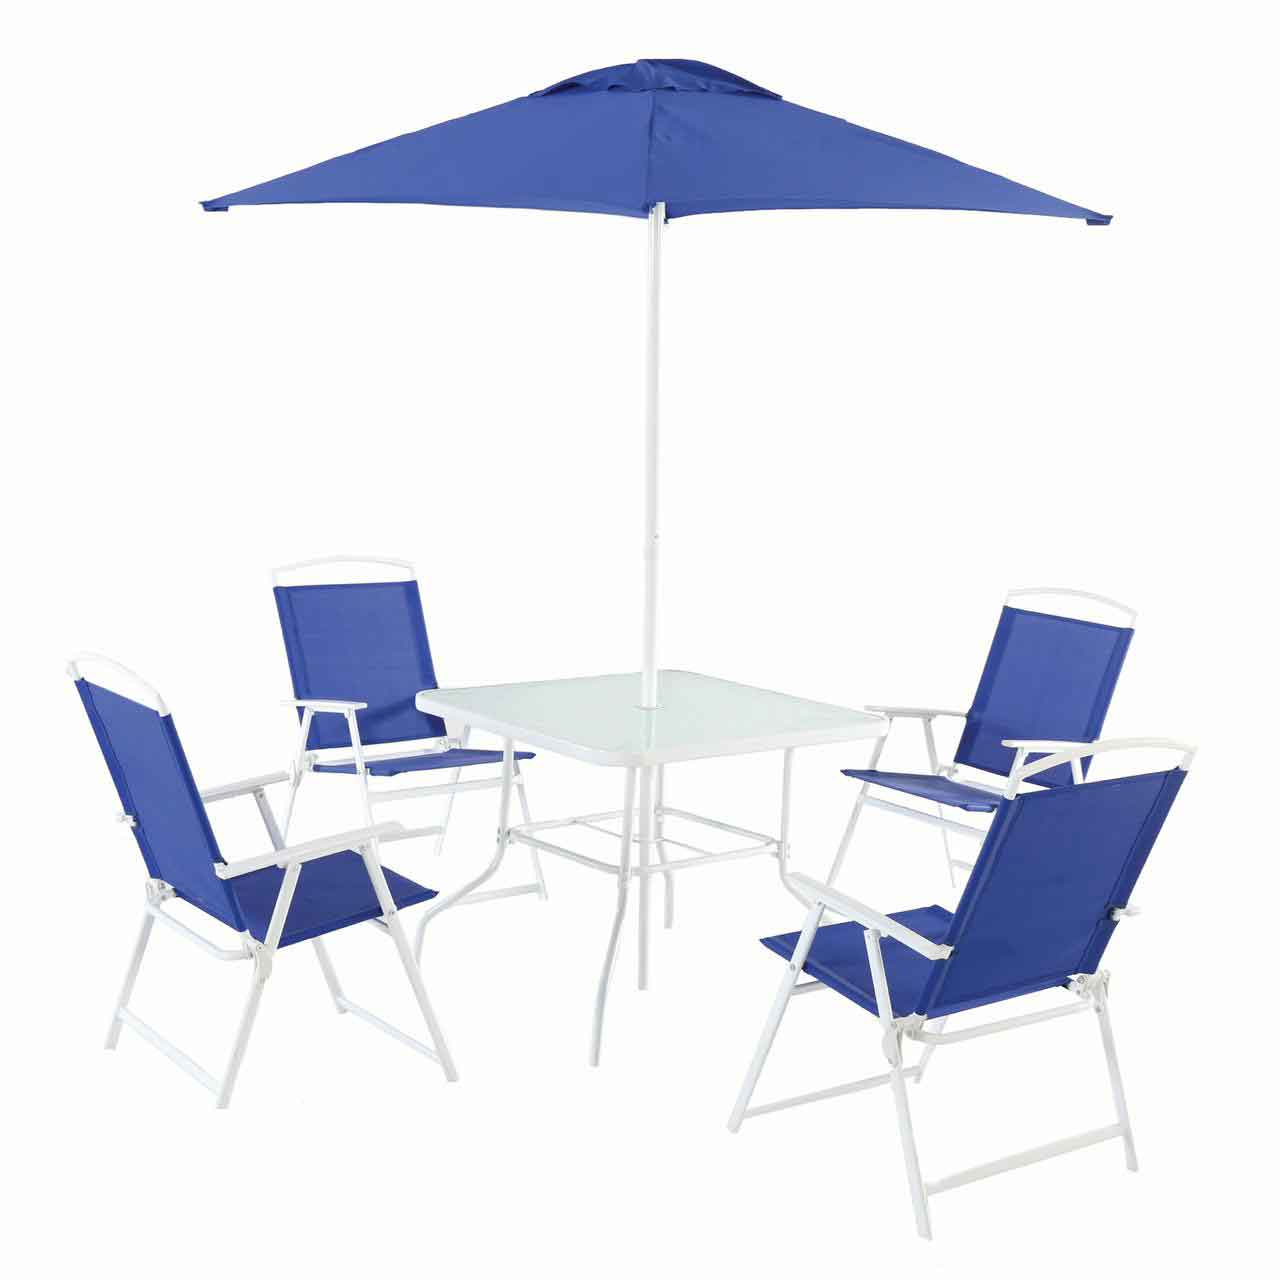 Traditional Albany Lane 6-Piece Outdoor Folding Seating Set in Blue 